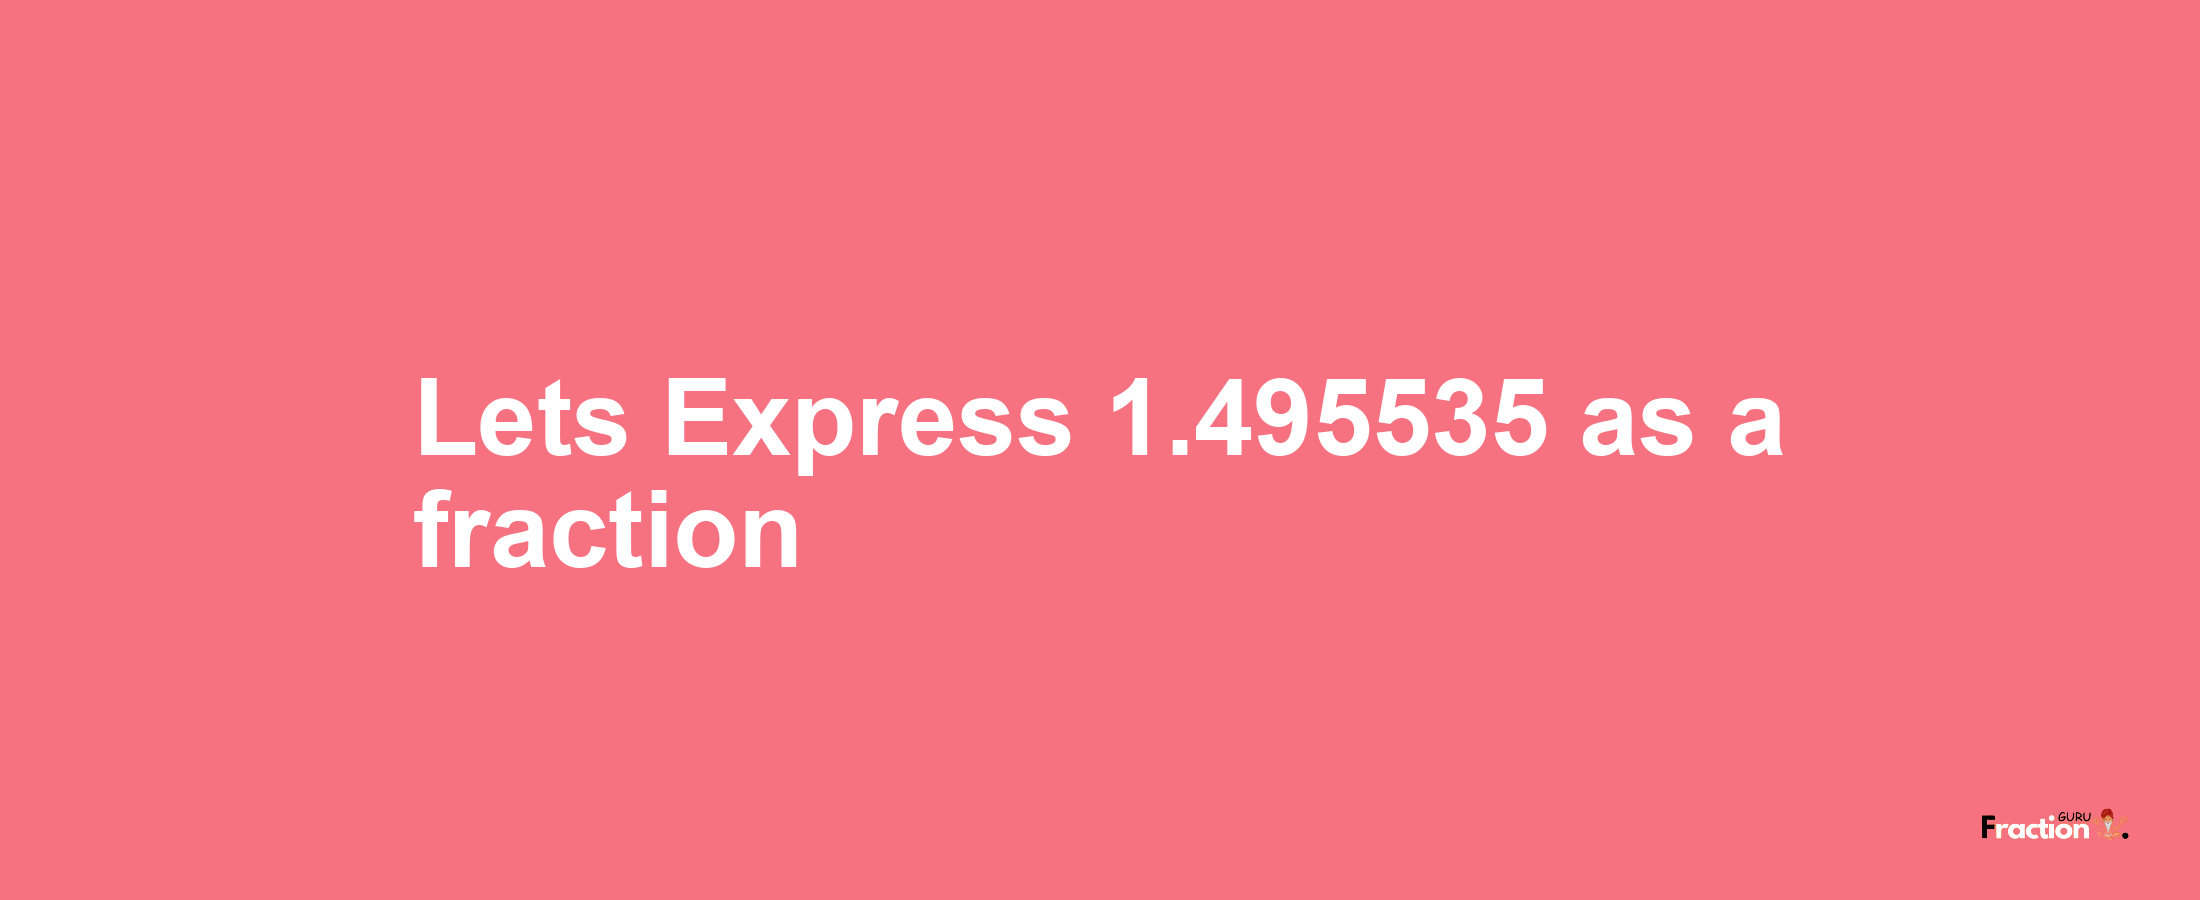 Lets Express 1.495535 as afraction